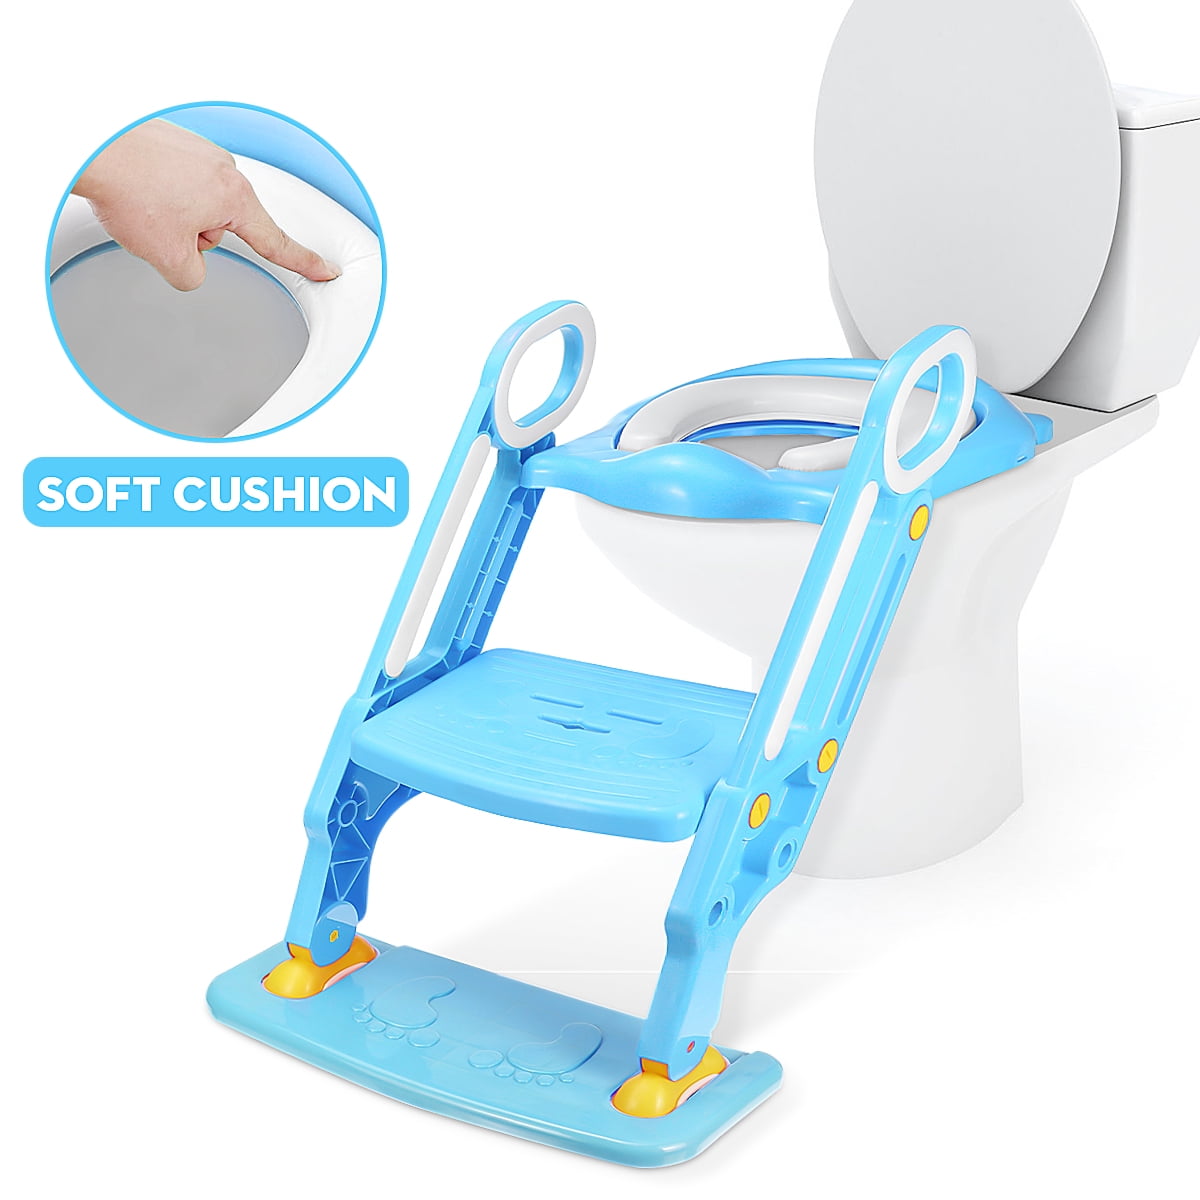 Baby Potty Training Seat Children's Kids Toilet Seat With Step Safety Kids Tools 